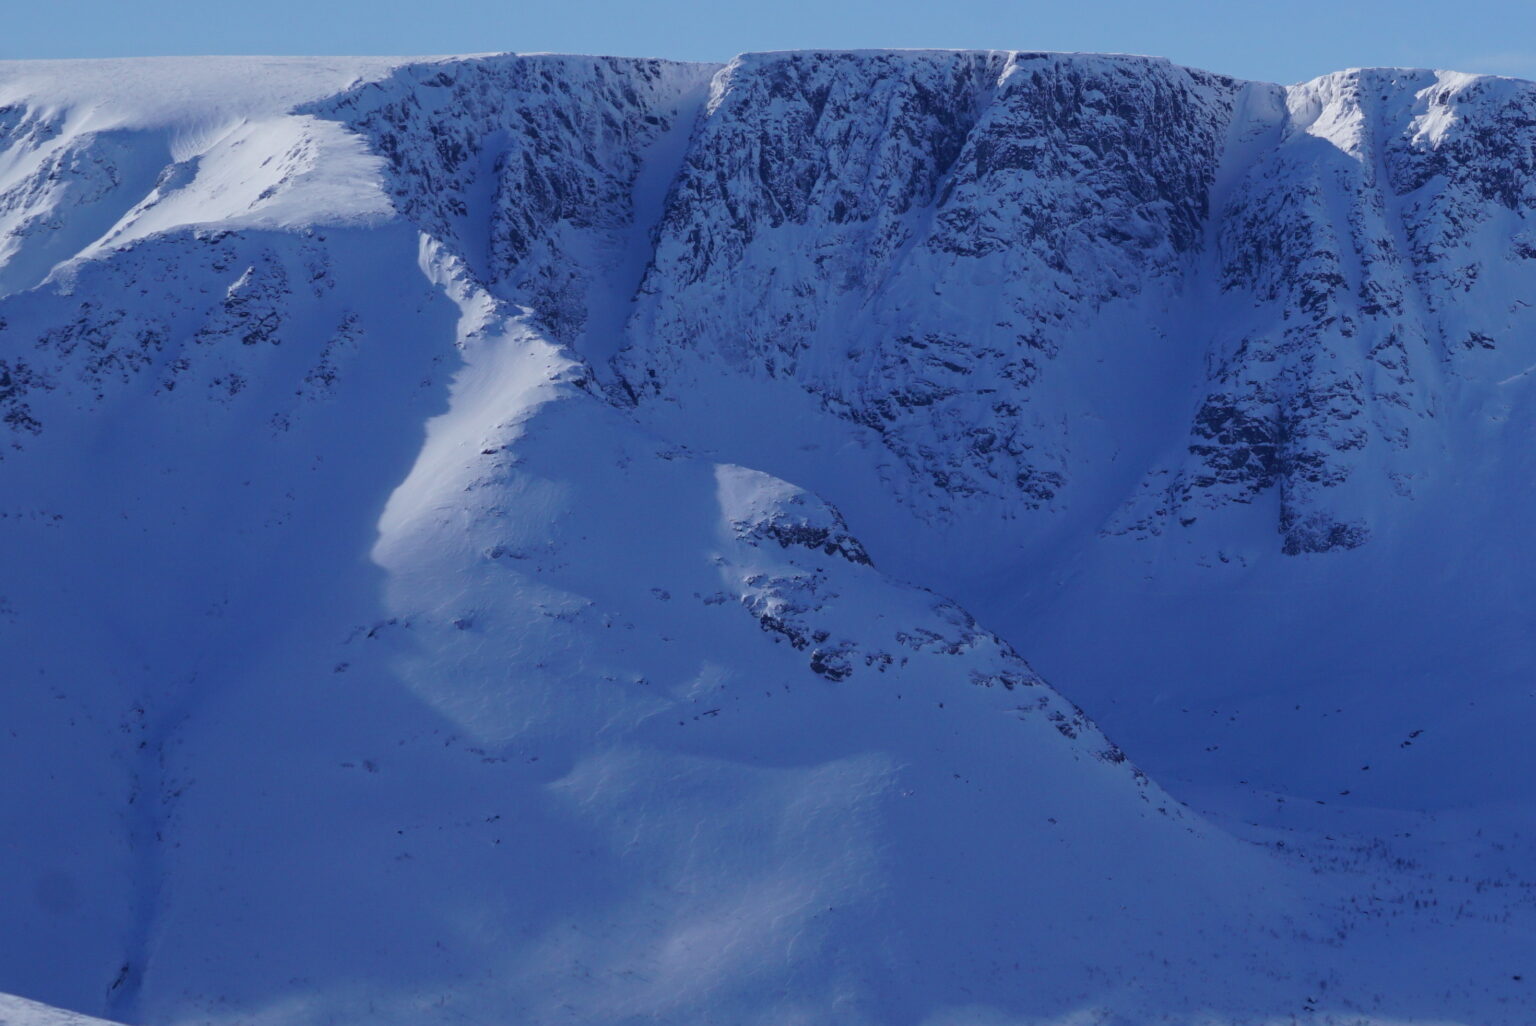 Looking at the East face of Tahtarvumchorr Ridge in the Khibiny Mountains